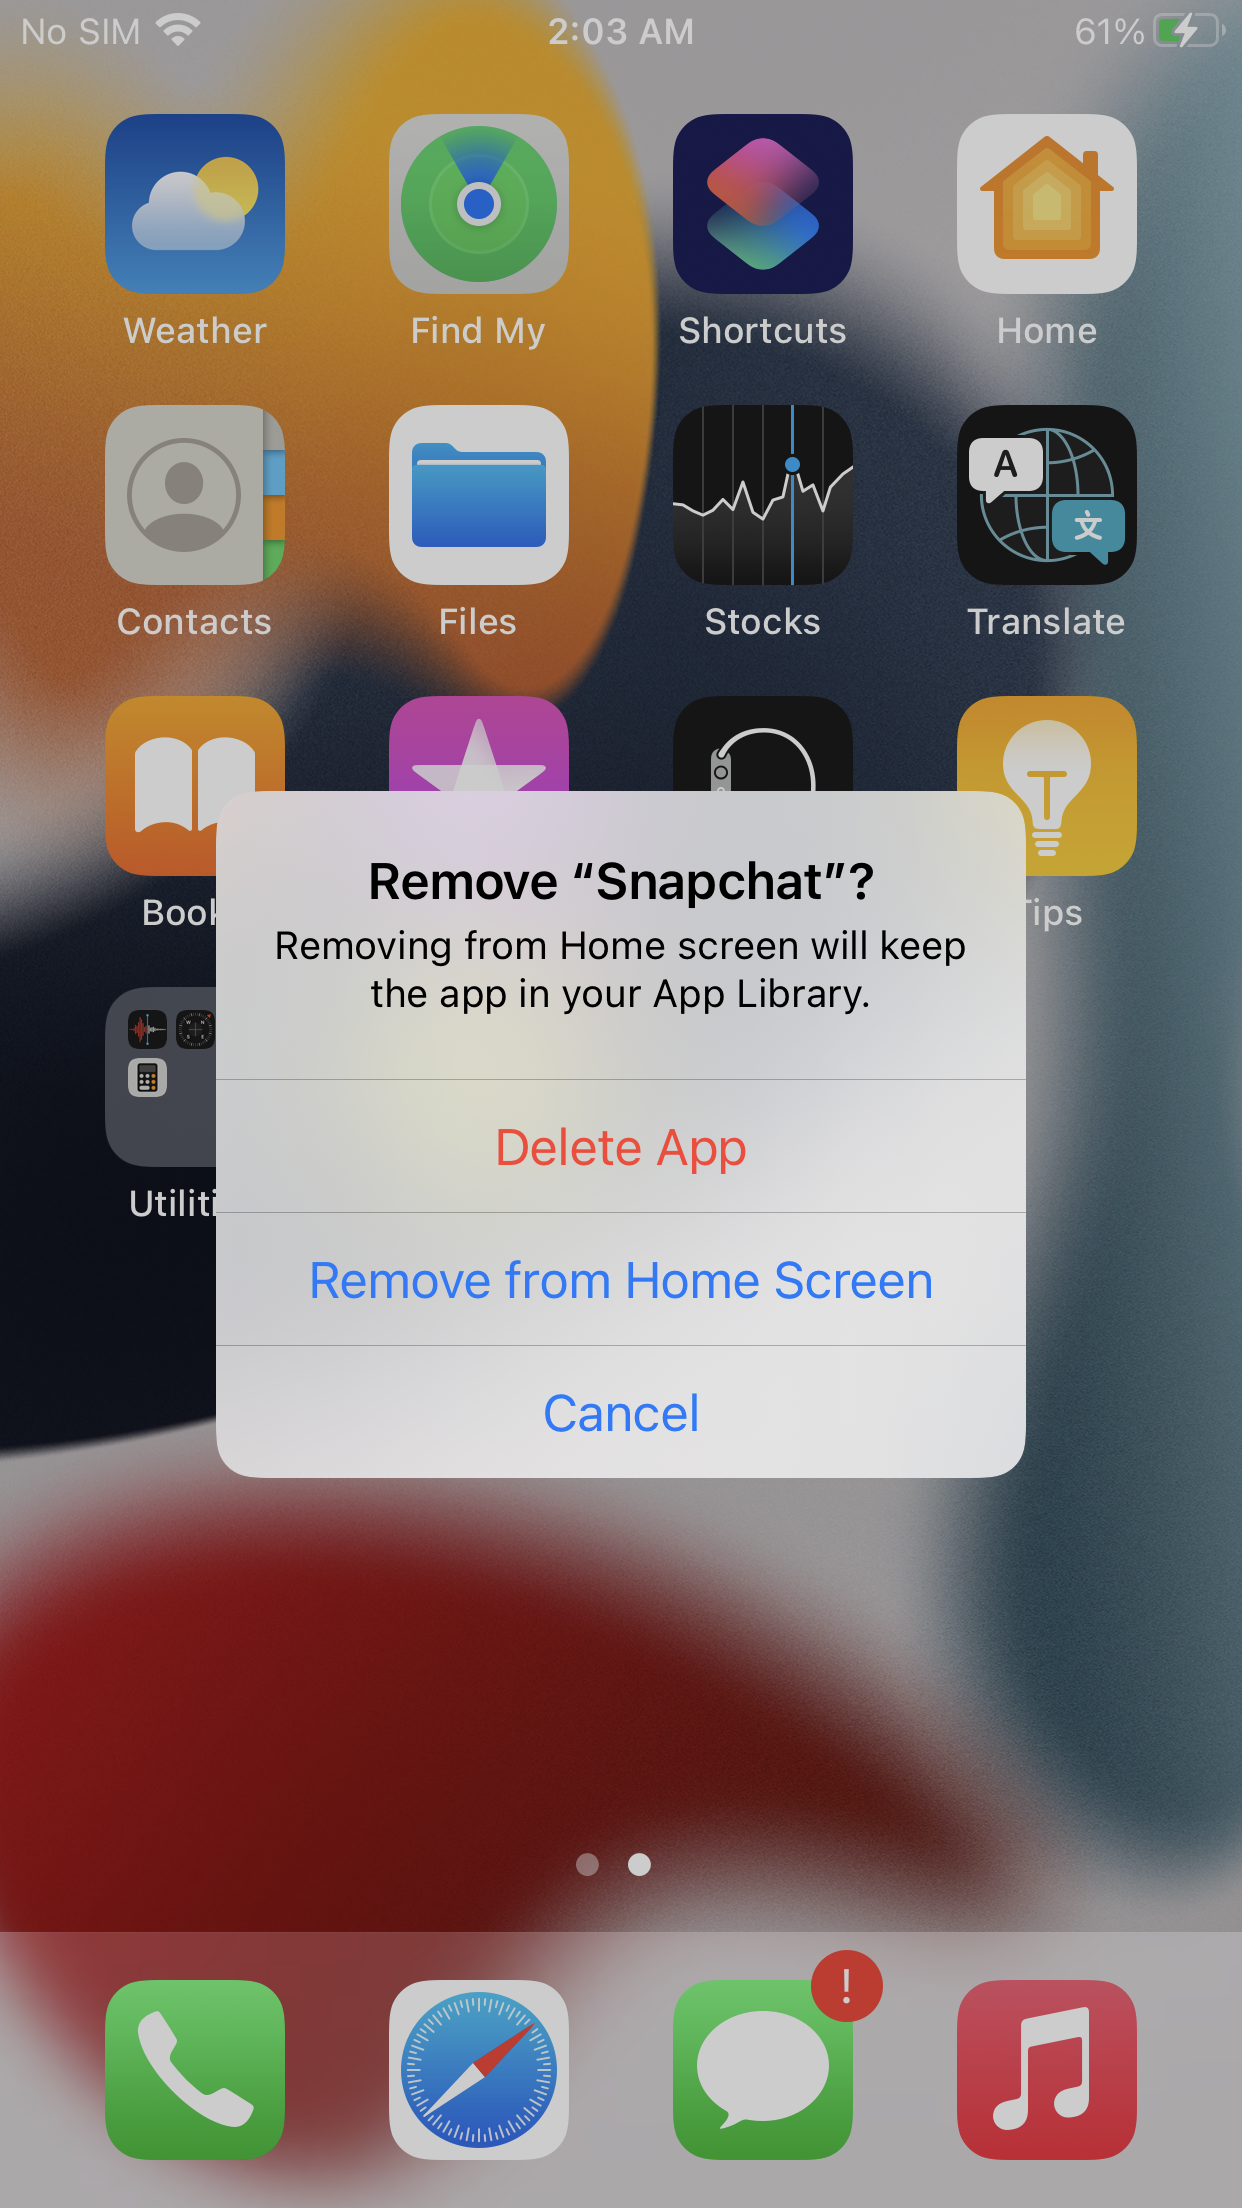 How To Fix Snapchat Not Loading Snaps On iPhone? Black Screen?